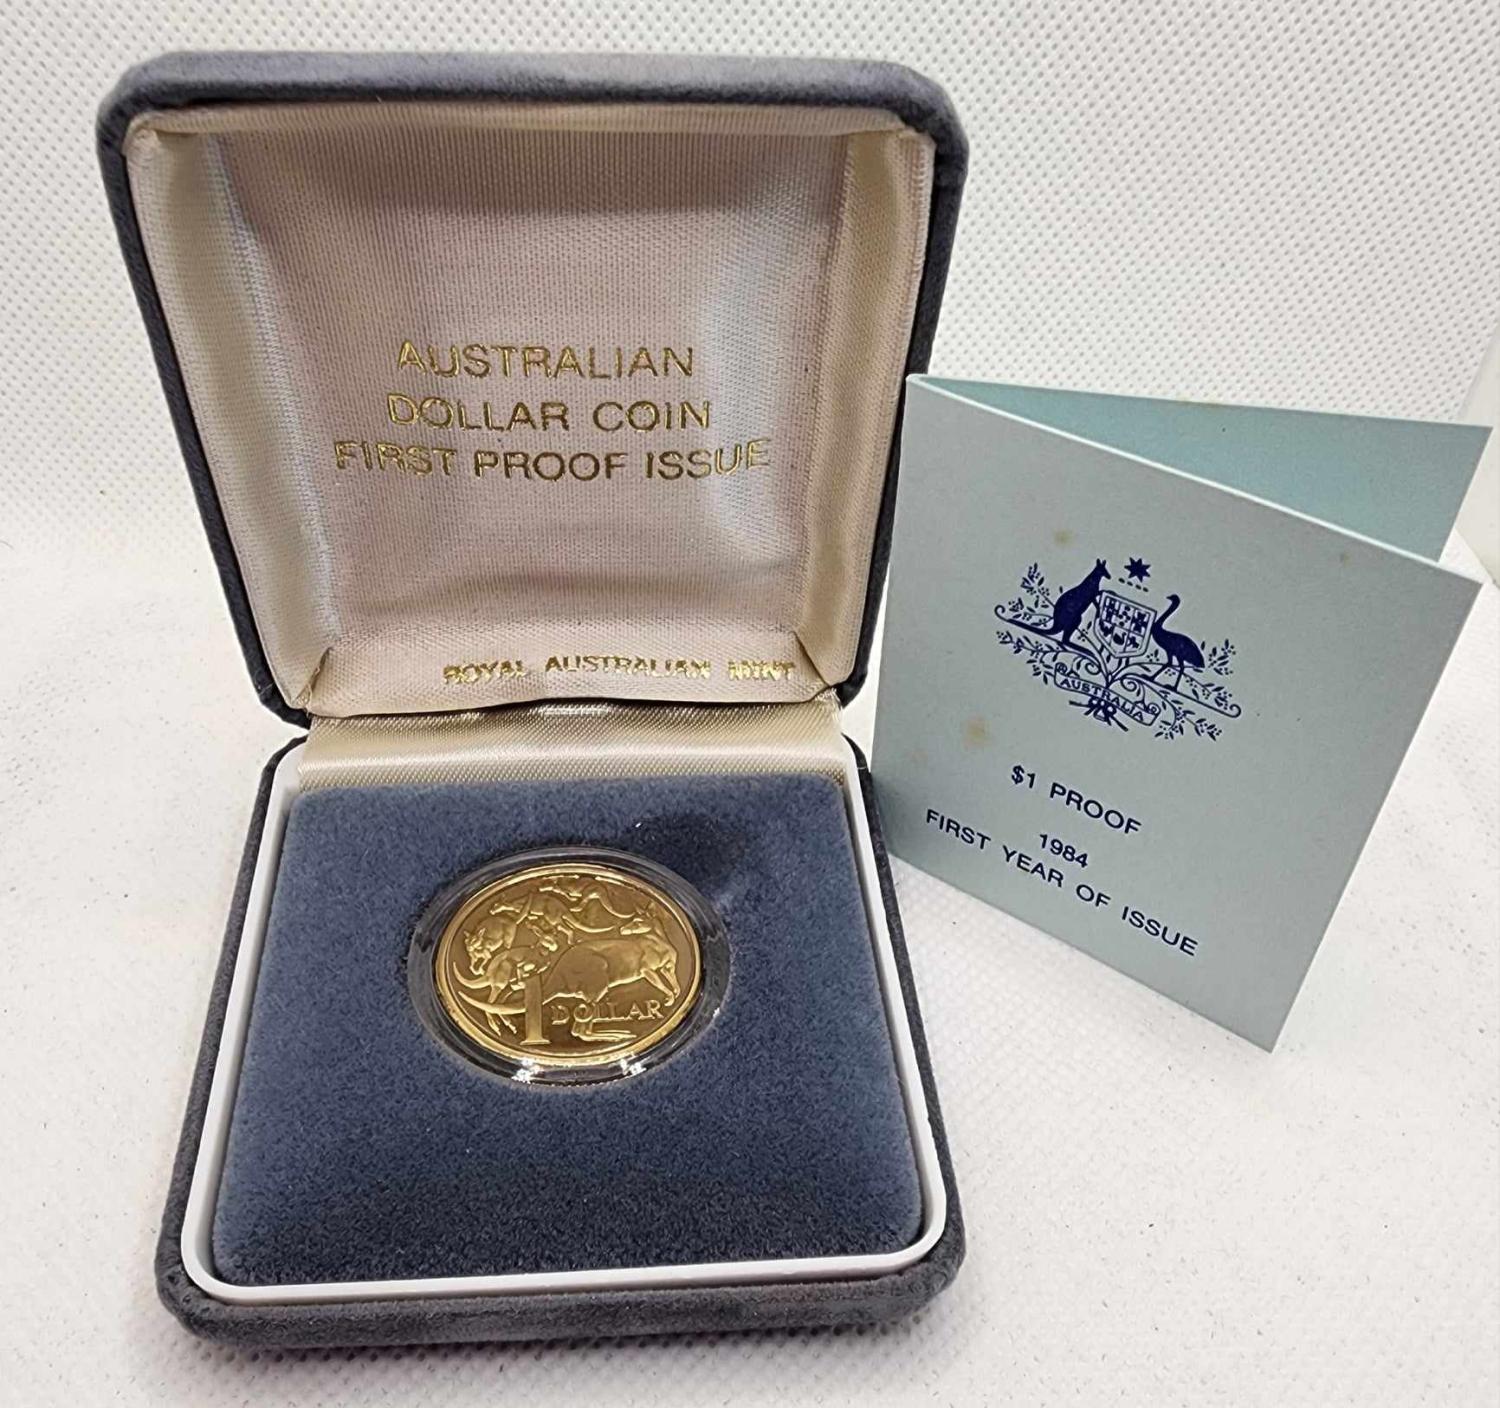 Thumbnail for 1984 Australian $1.00 Proof Coin in Original Case